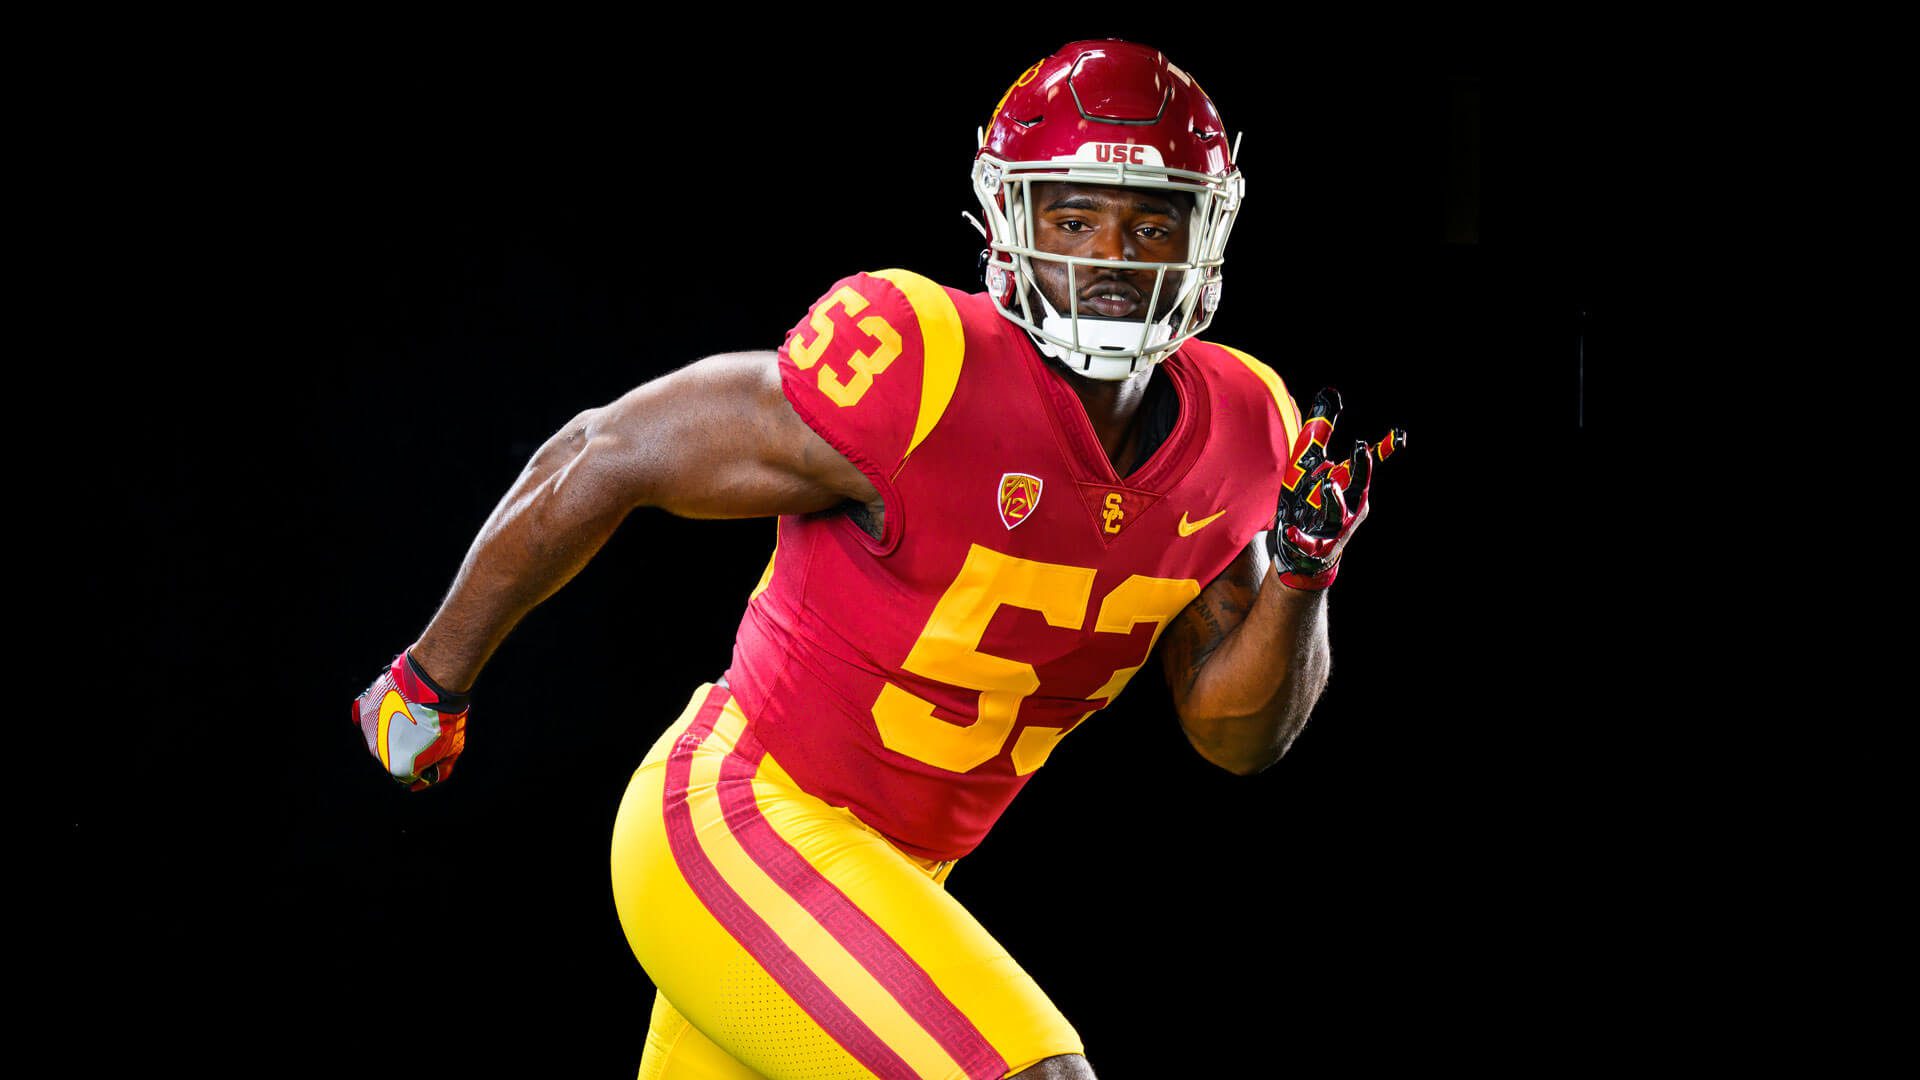 Shane Lee is a leader on the USC defense at LB who possesses good overall play strength and a high motor. Hula Bowl scout Ryan Vidales breaks down Lee as an NFL Prospect in his report.